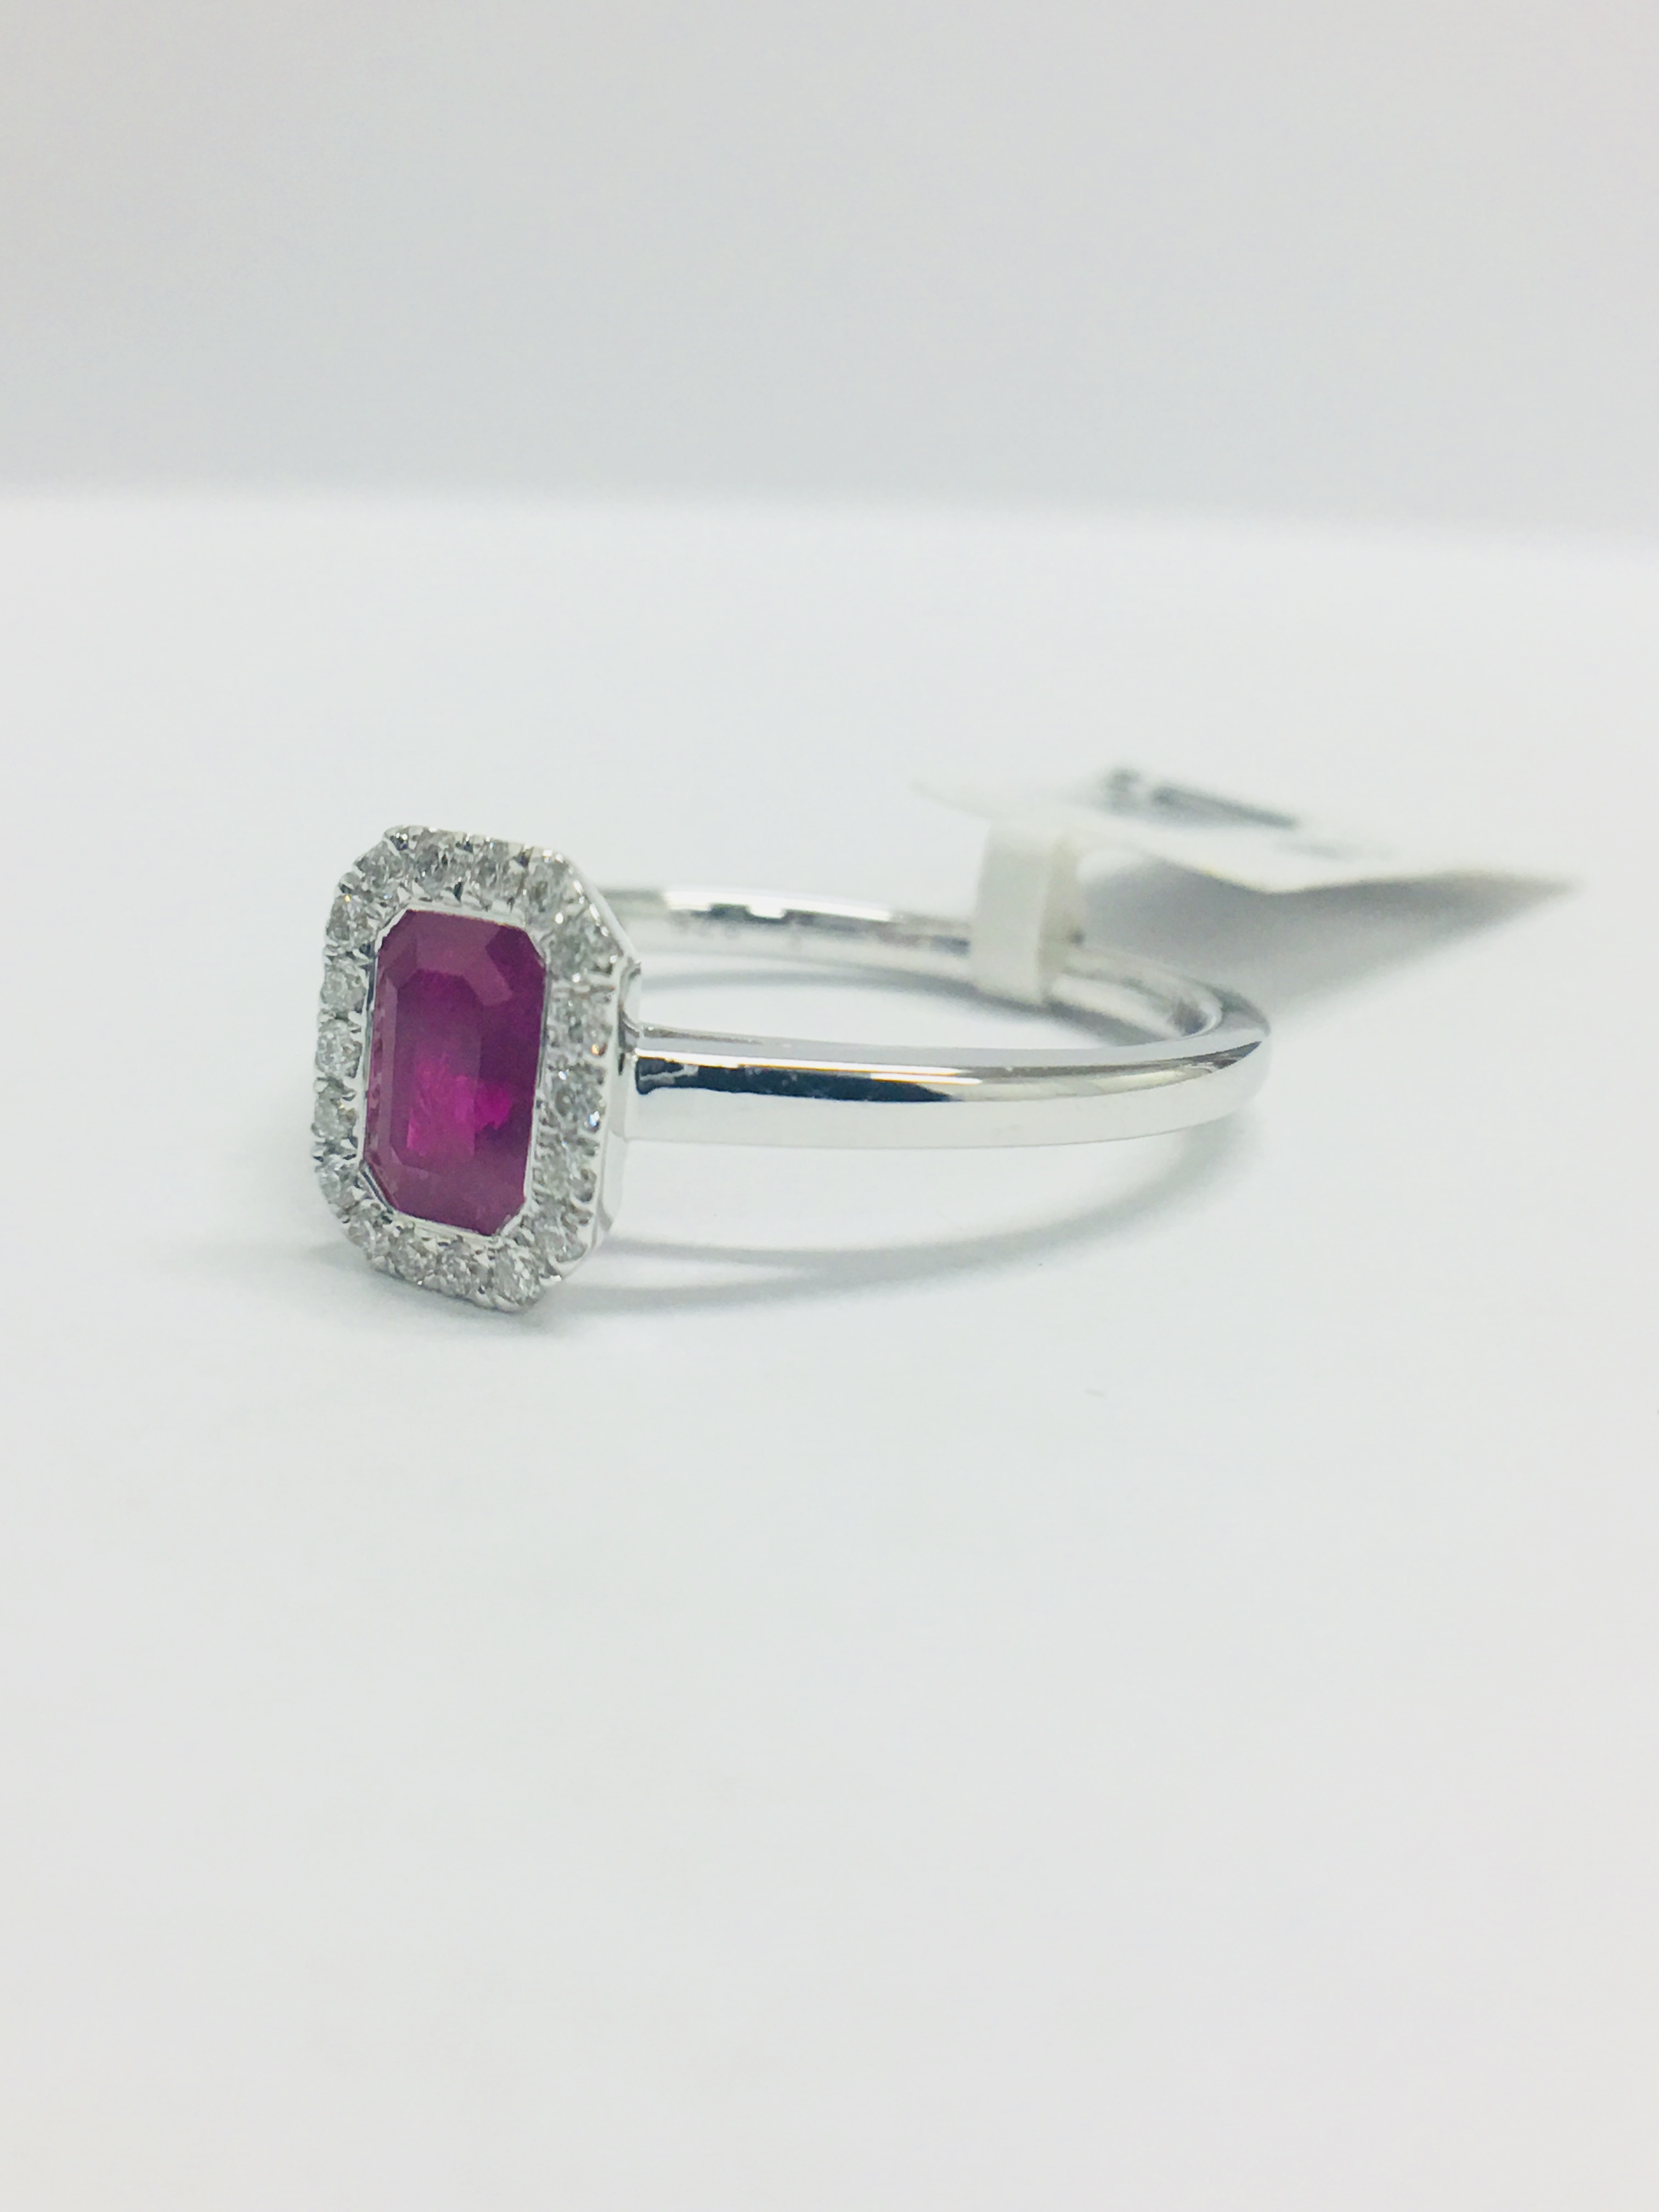 9Ct White Gold Ruby Diamond Cluster Ring, - Image 2 of 7